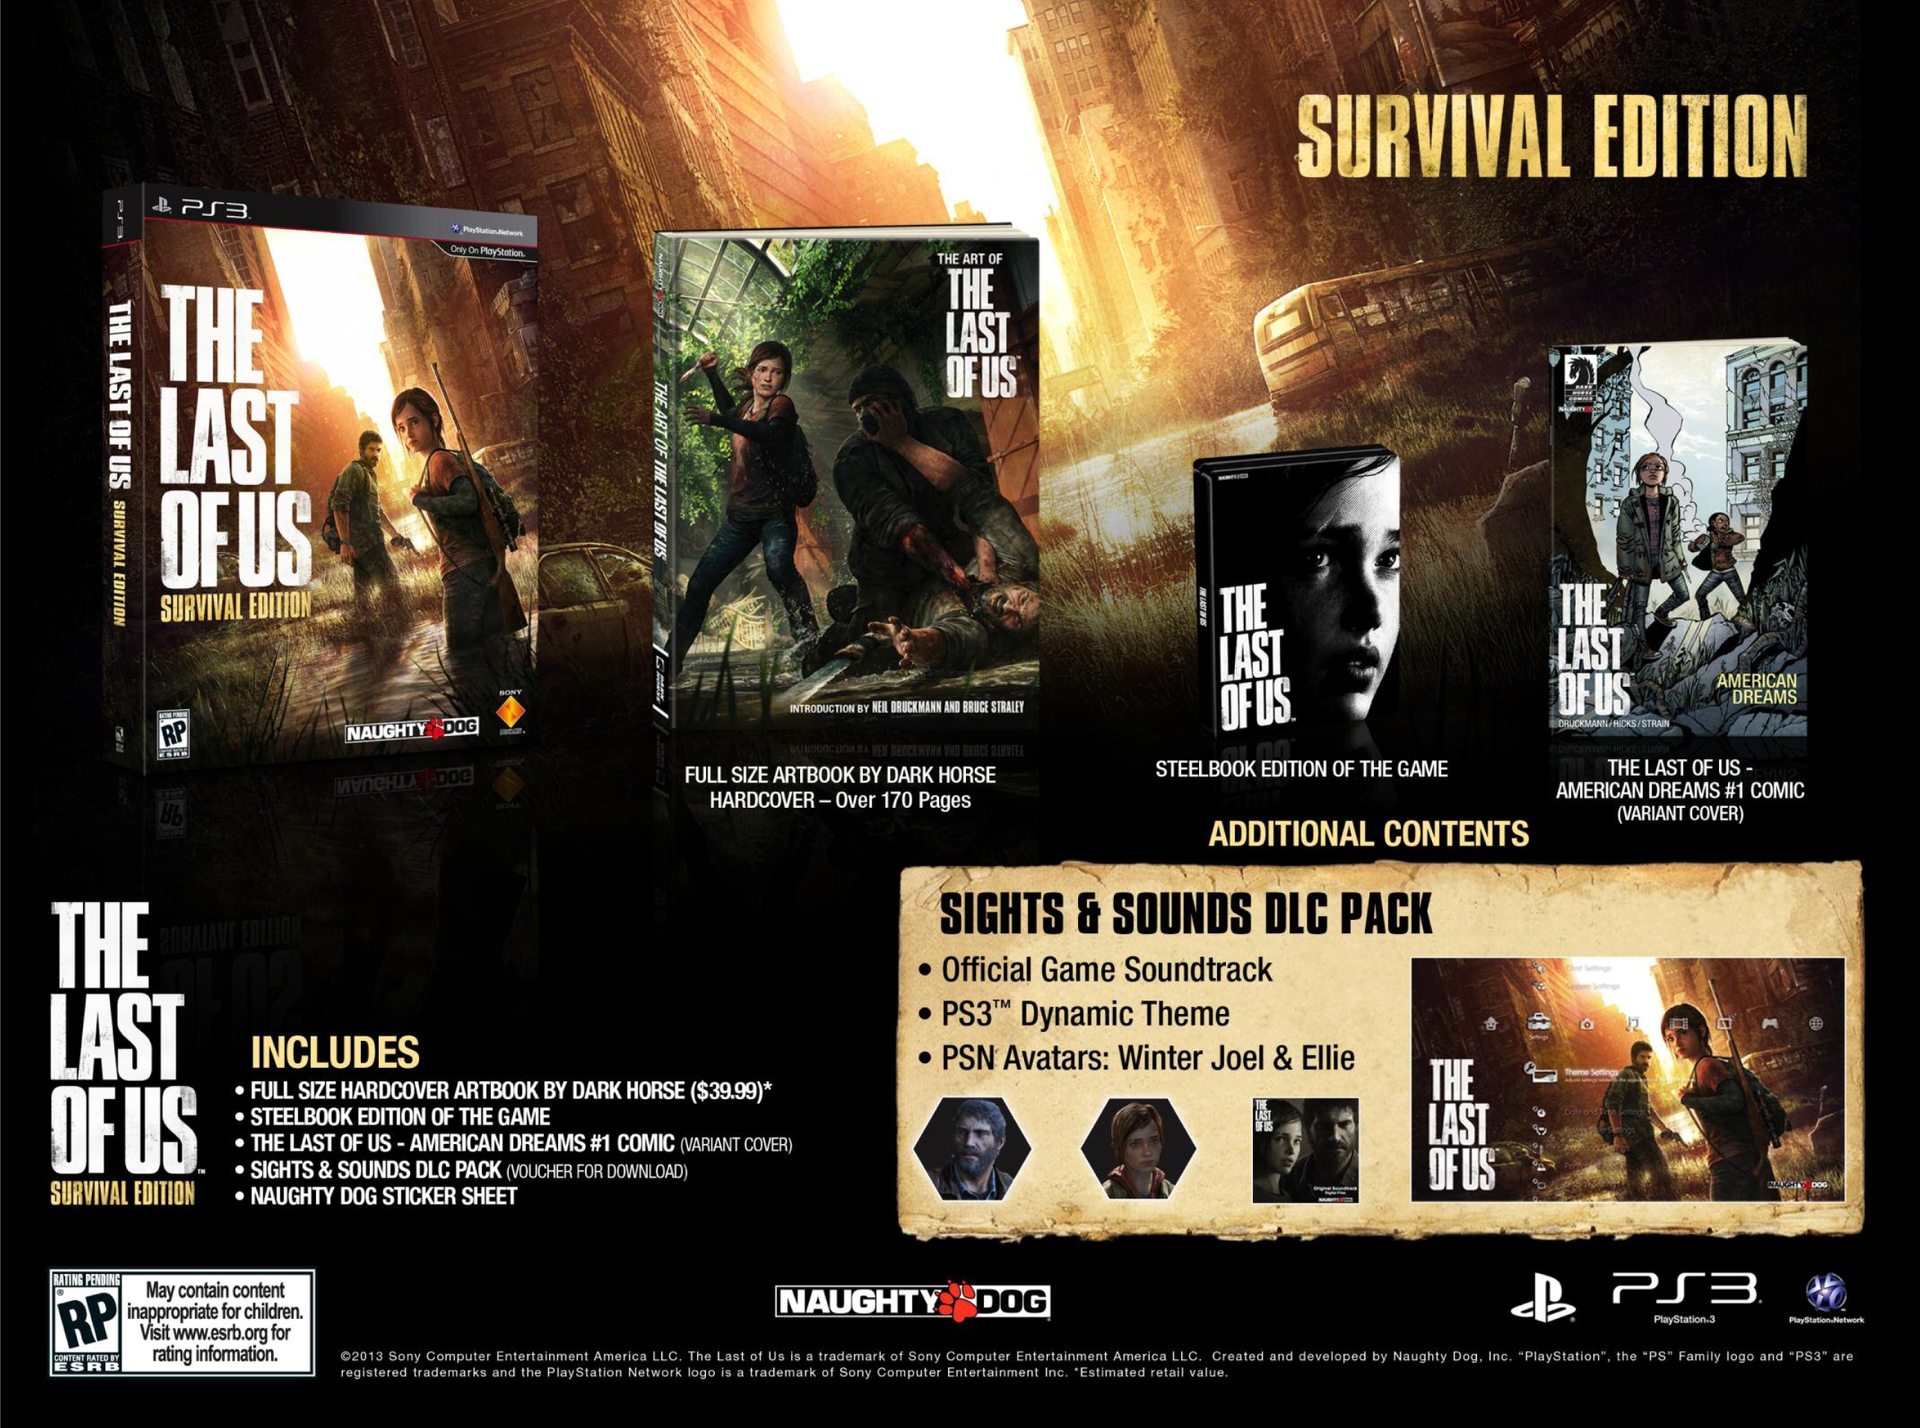 the last of us 2 ps3